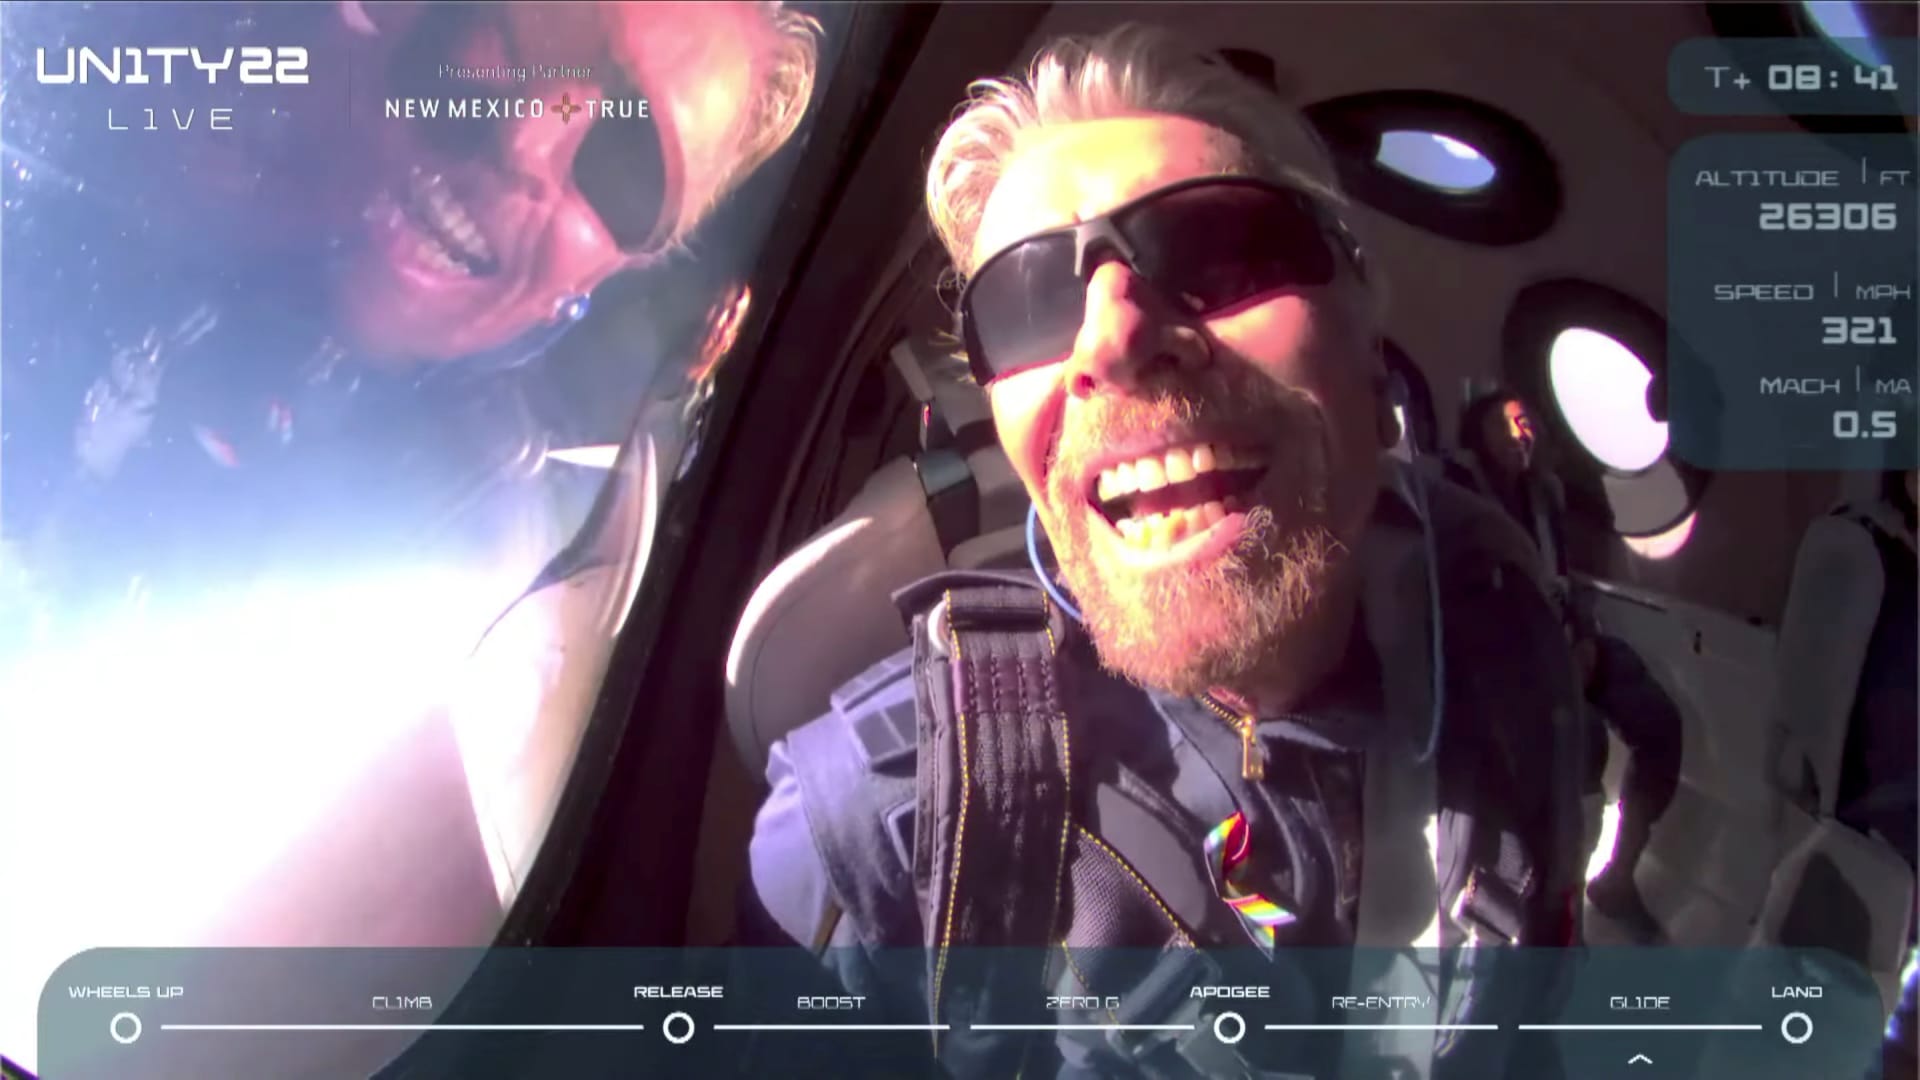 Billionaire Richard Branson reacts on board Virgin Galactic's passenger rocket plane VSS Unity after reaching the edge of space above Spaceport America near Truth or Consequences, New Mexico, U.S. July 11, 2021 in a still image from video.